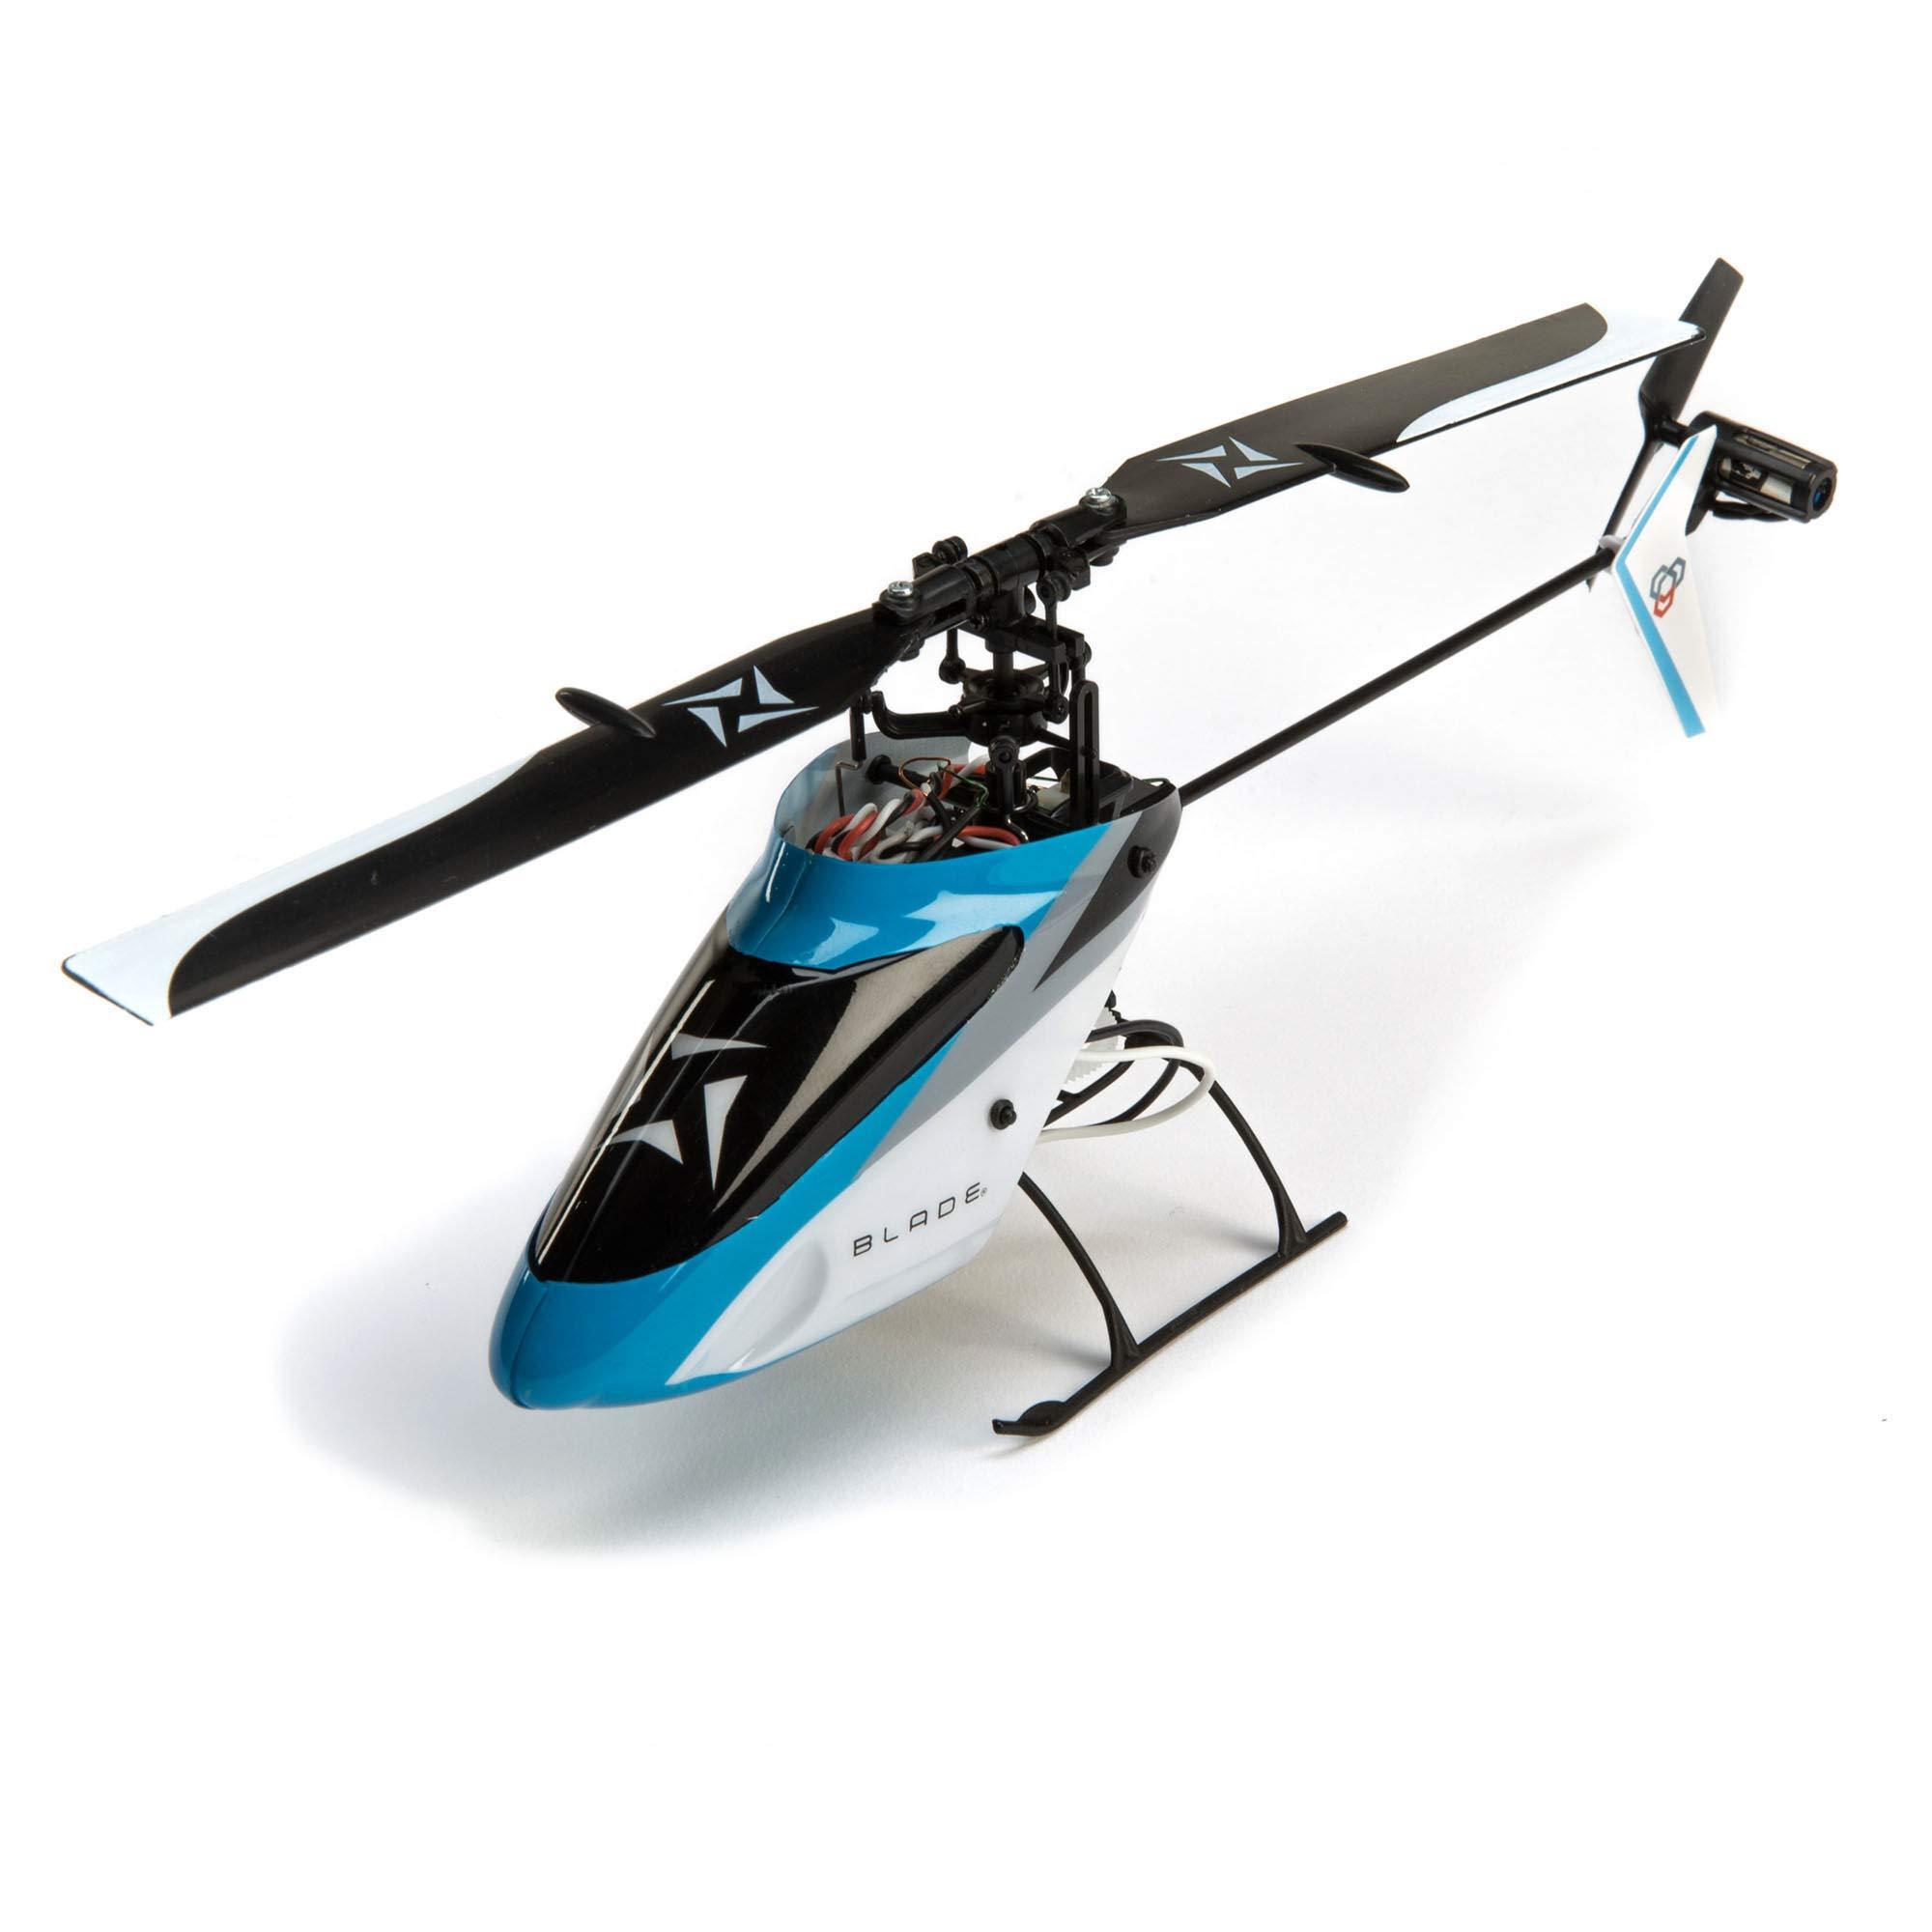 Rc Heli Servos:  If you're considering upgrading your RC helicopter's servos, research is key.